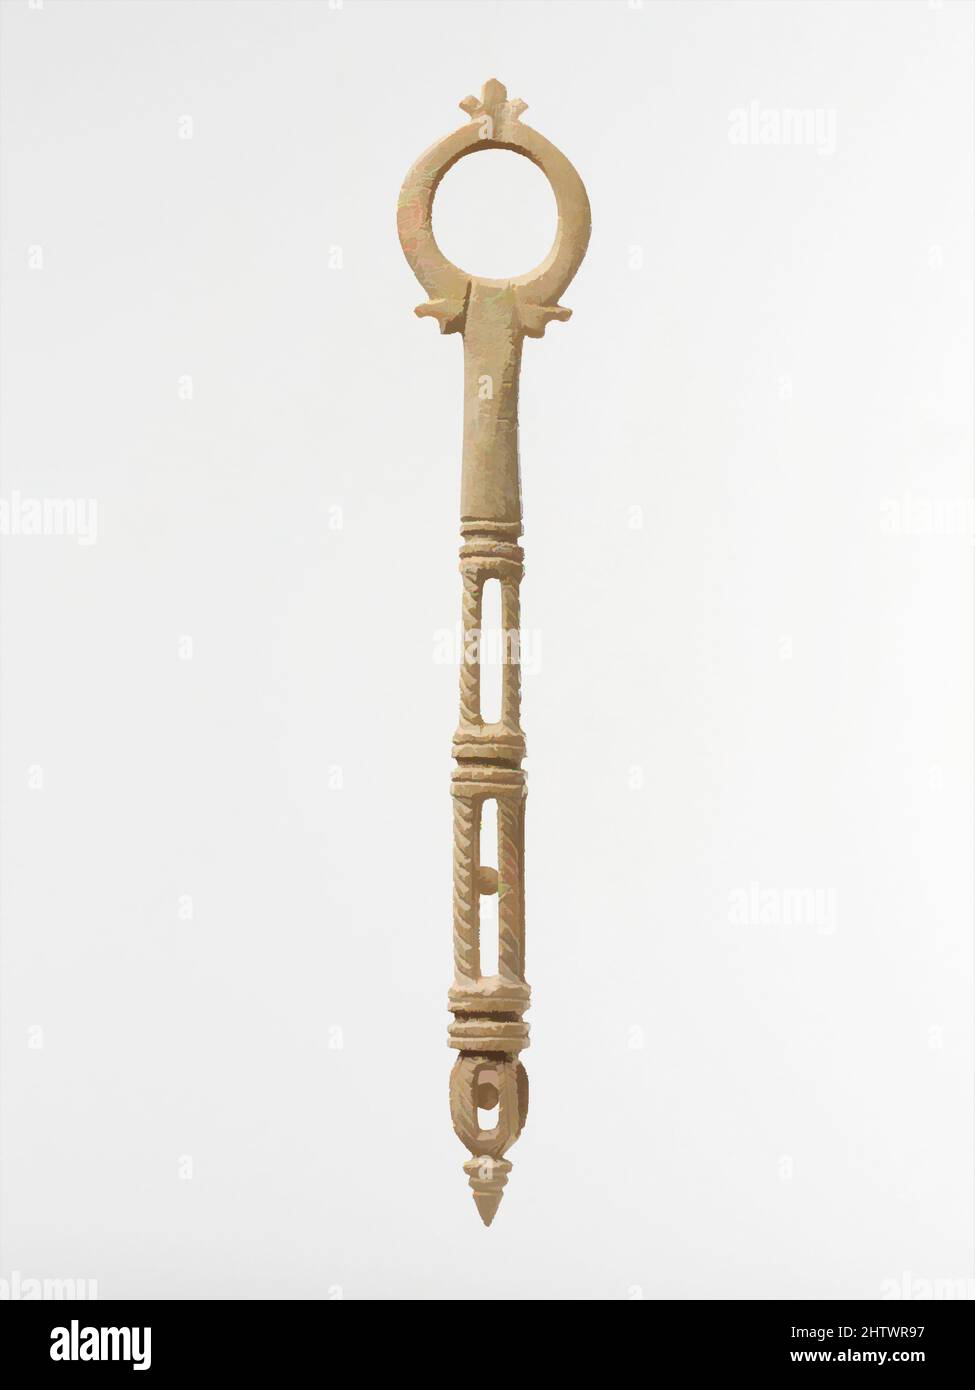 Art inspired by Bone implement, Imperial, 2nd–3rd century A.D., Roman, Bone, H.: 6 11/16 in. (17 cm), The object, although it has the same basic shape as stirring rods in bronze and glass, is unlikely to have been used for stirring, mixing, or applying cosmetics and ointments. A more, Classic works modernized by Artotop with a splash of modernity. Shapes, color and value, eye-catching visual impact on art. Emotions through freedom of artworks in a contemporary way. A timeless message pursuing a wildly creative new direction. Artists turning to the digital medium and creating the Artotop NFT Stock Photo